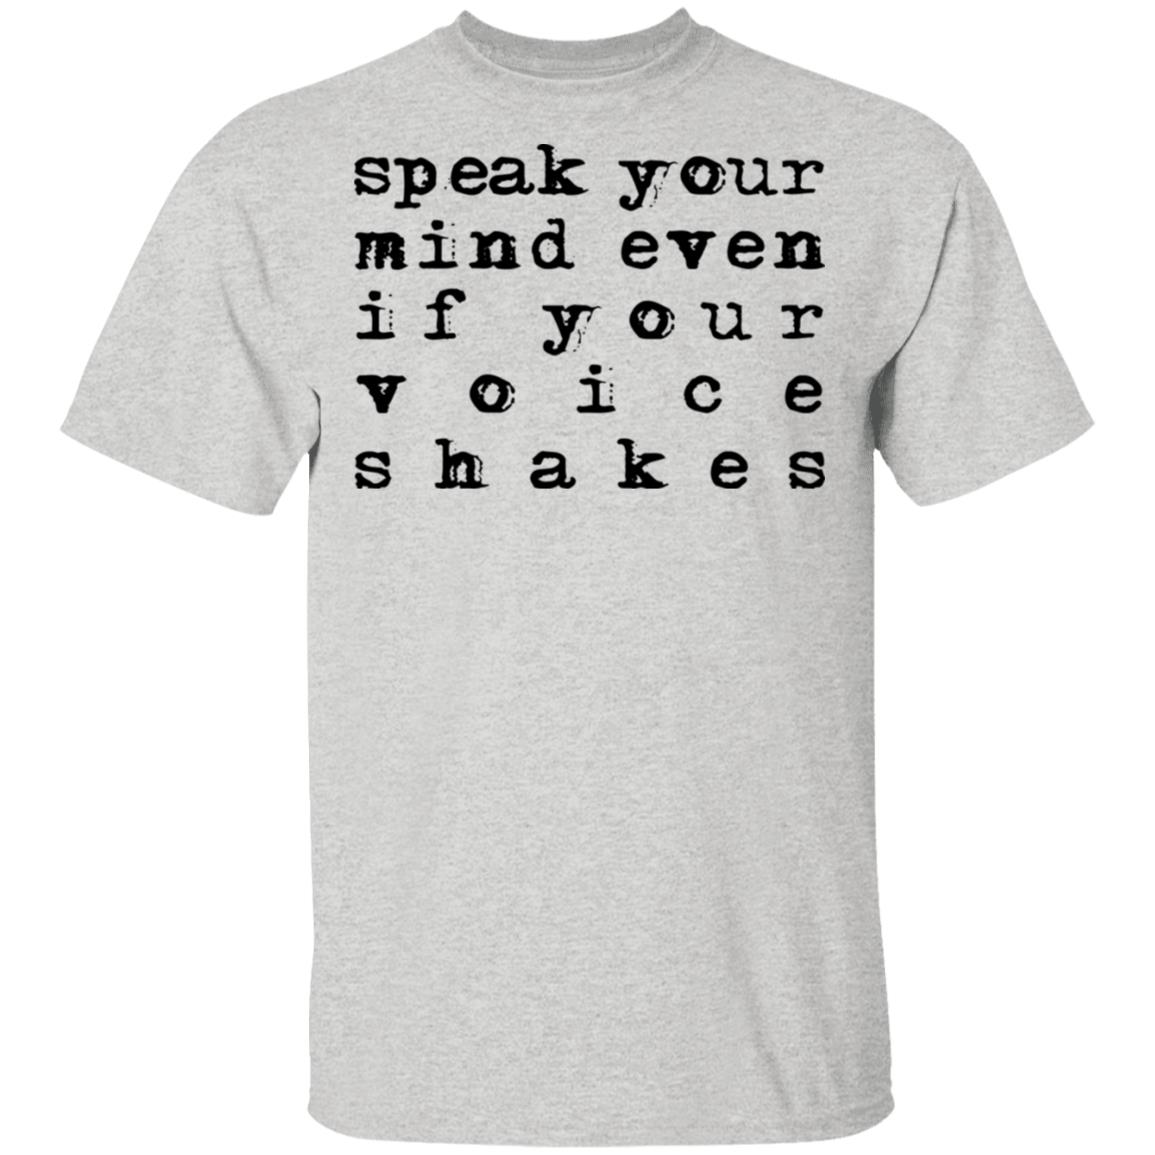 Speak Your Mind Even If Your Voice Shakes T-Shirt - Allbluetees ...